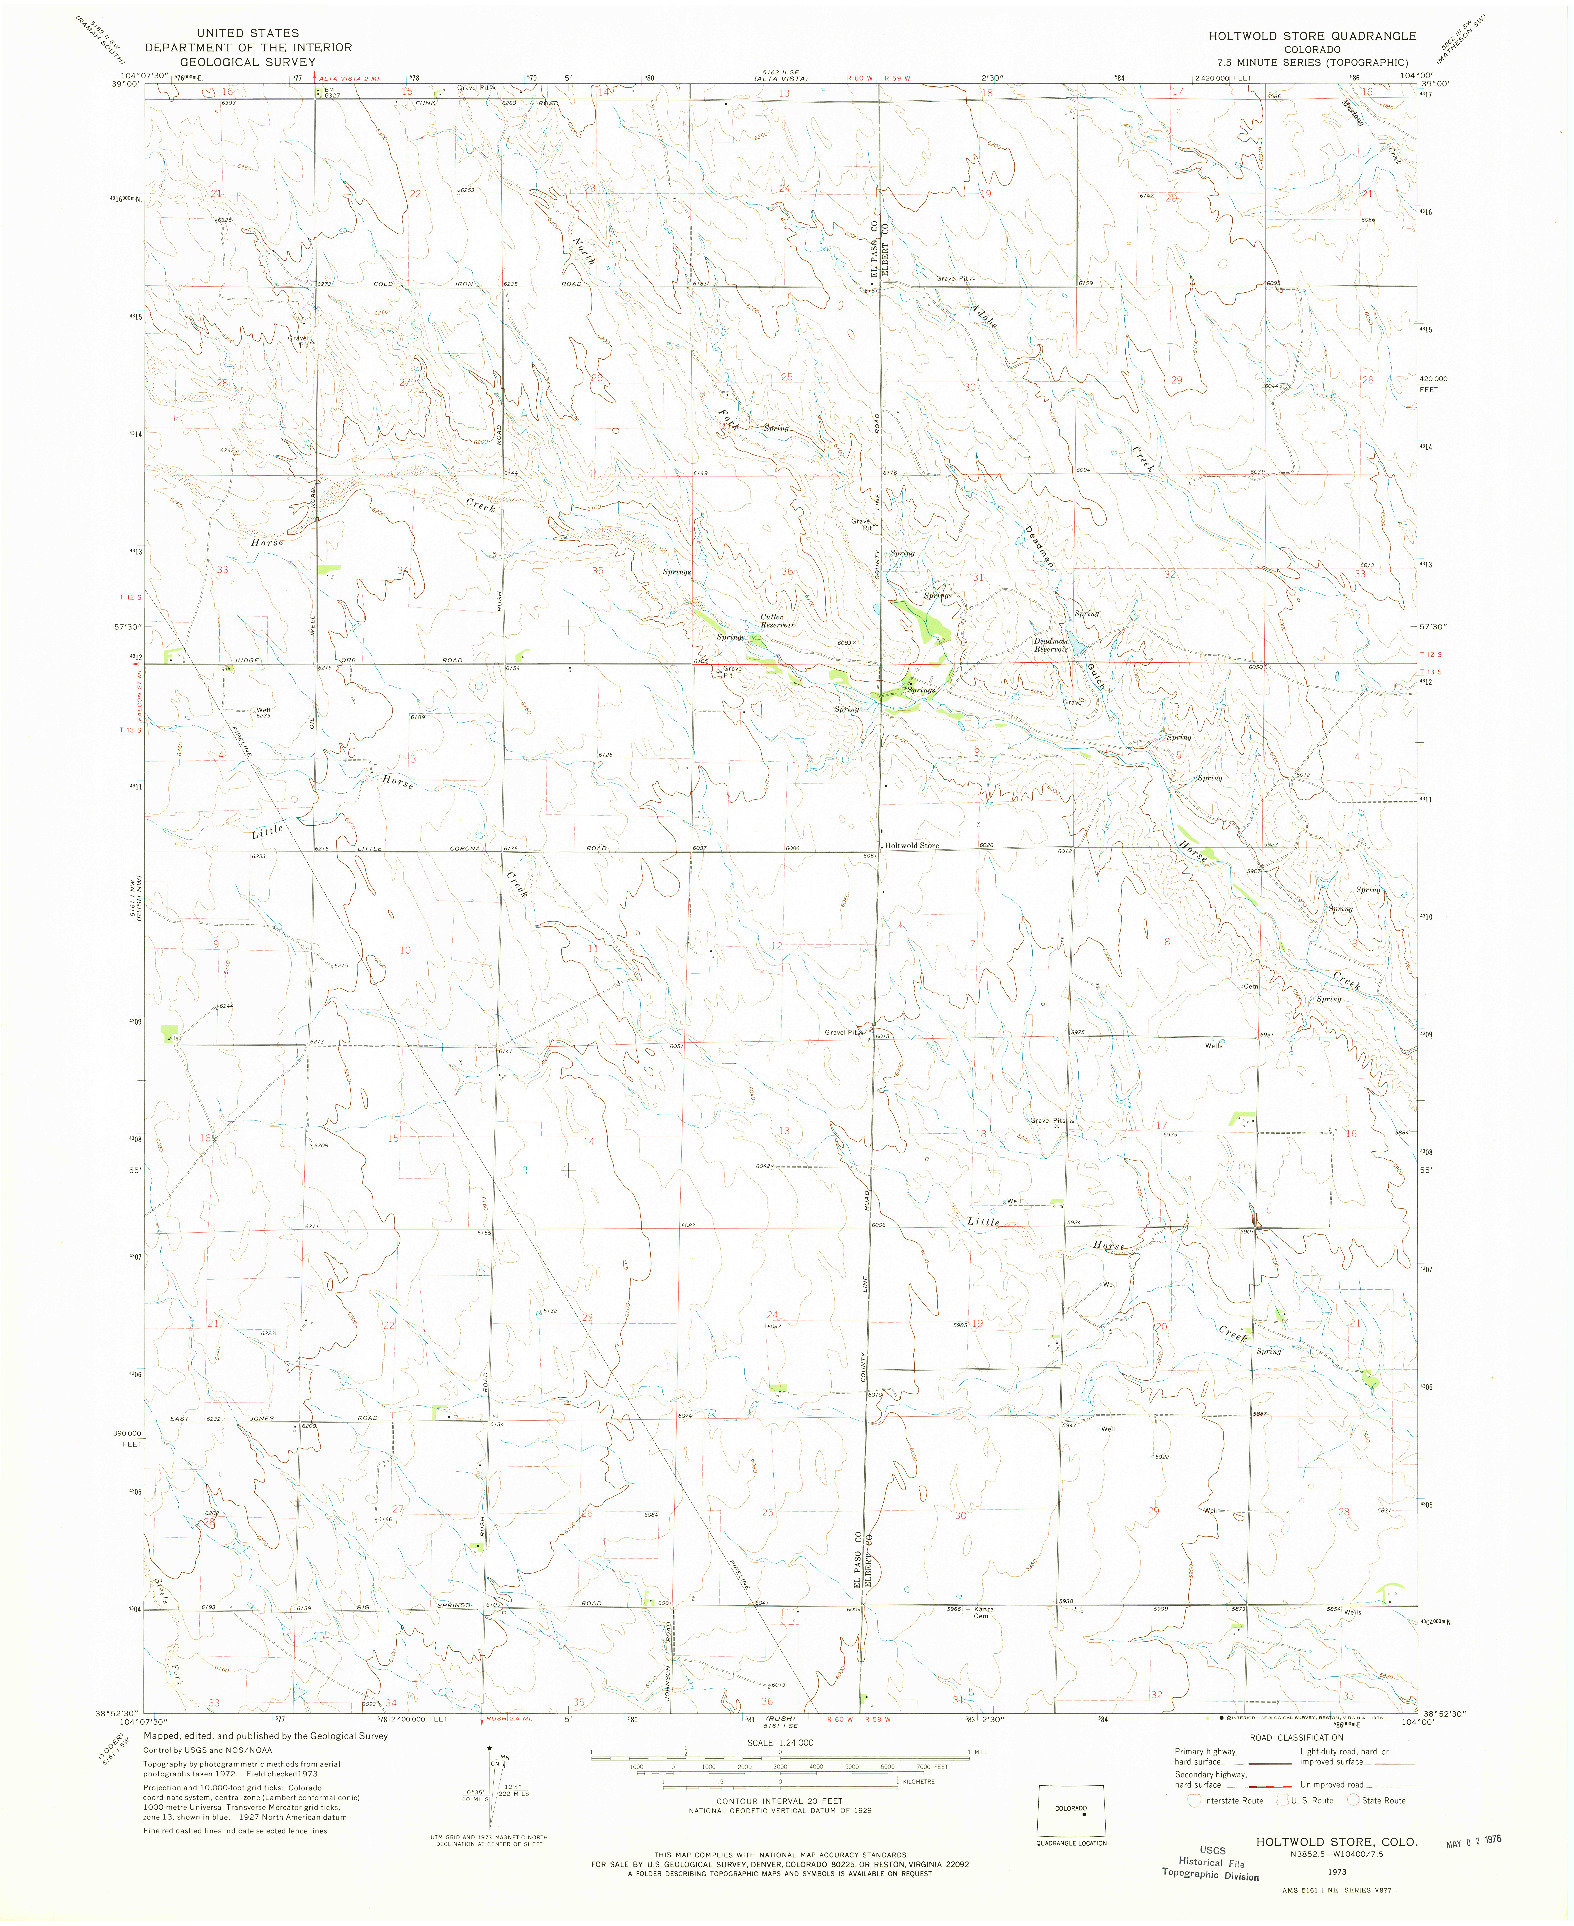 USGS 1:24000-SCALE QUADRANGLE FOR HOLTWOLD STORE, CO 1973